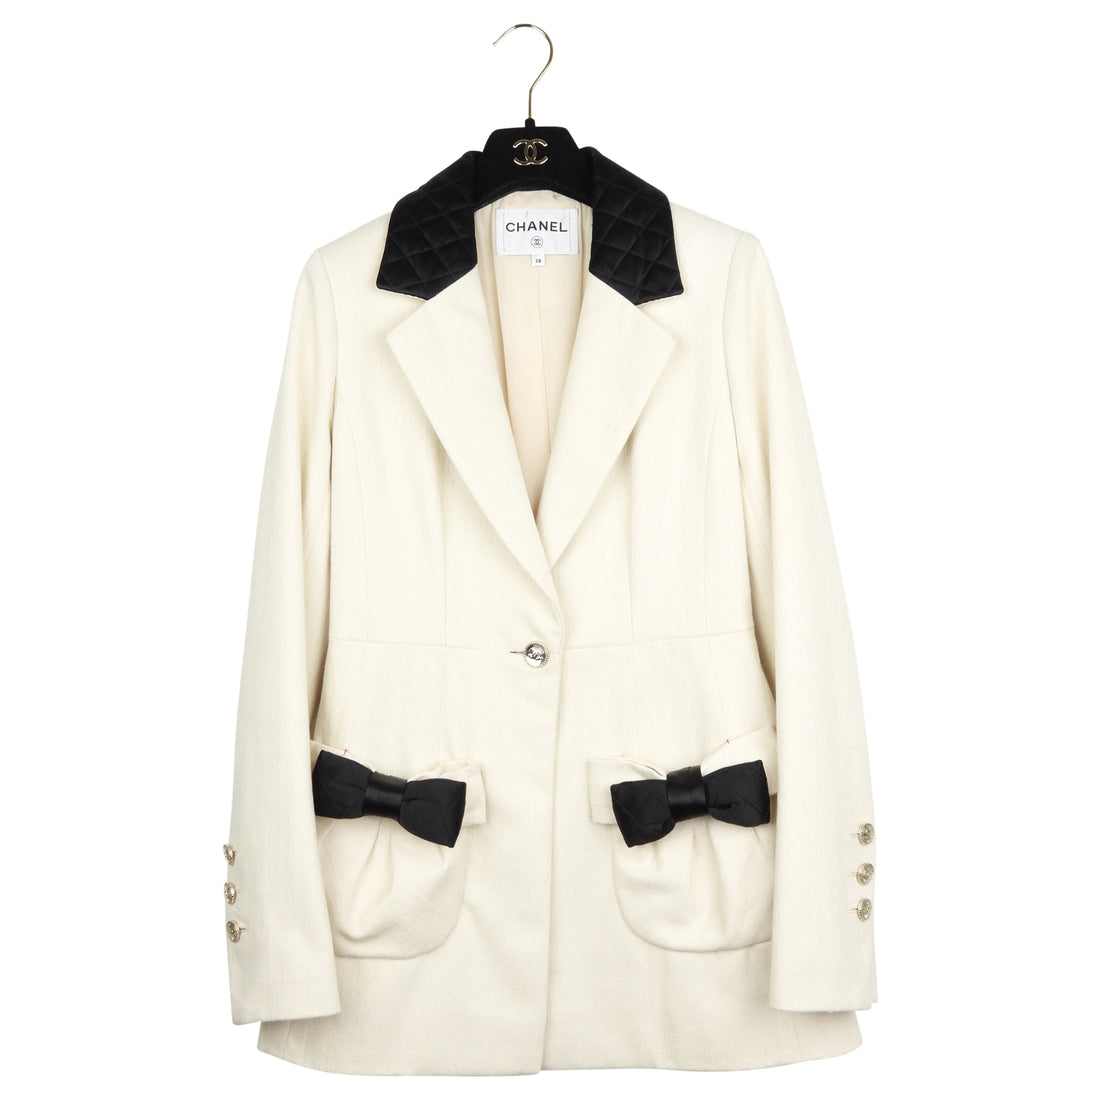 Chanel 21S Ecru Cotton Jacket with Silk  Satin Bow Accents- FR38